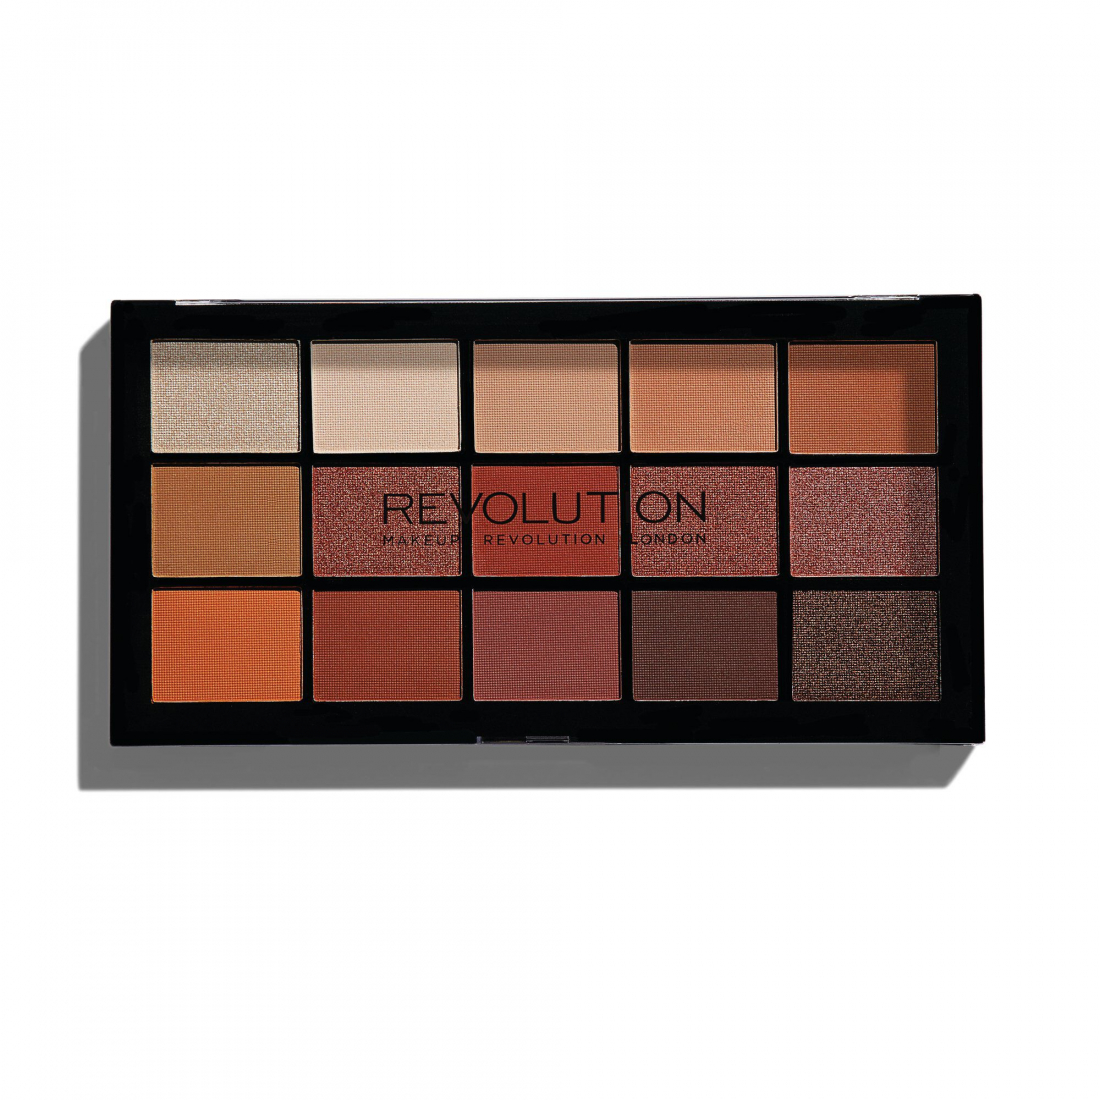 'Reloaded' Eyeshadow Palette - Iconic Fever 16.5 g